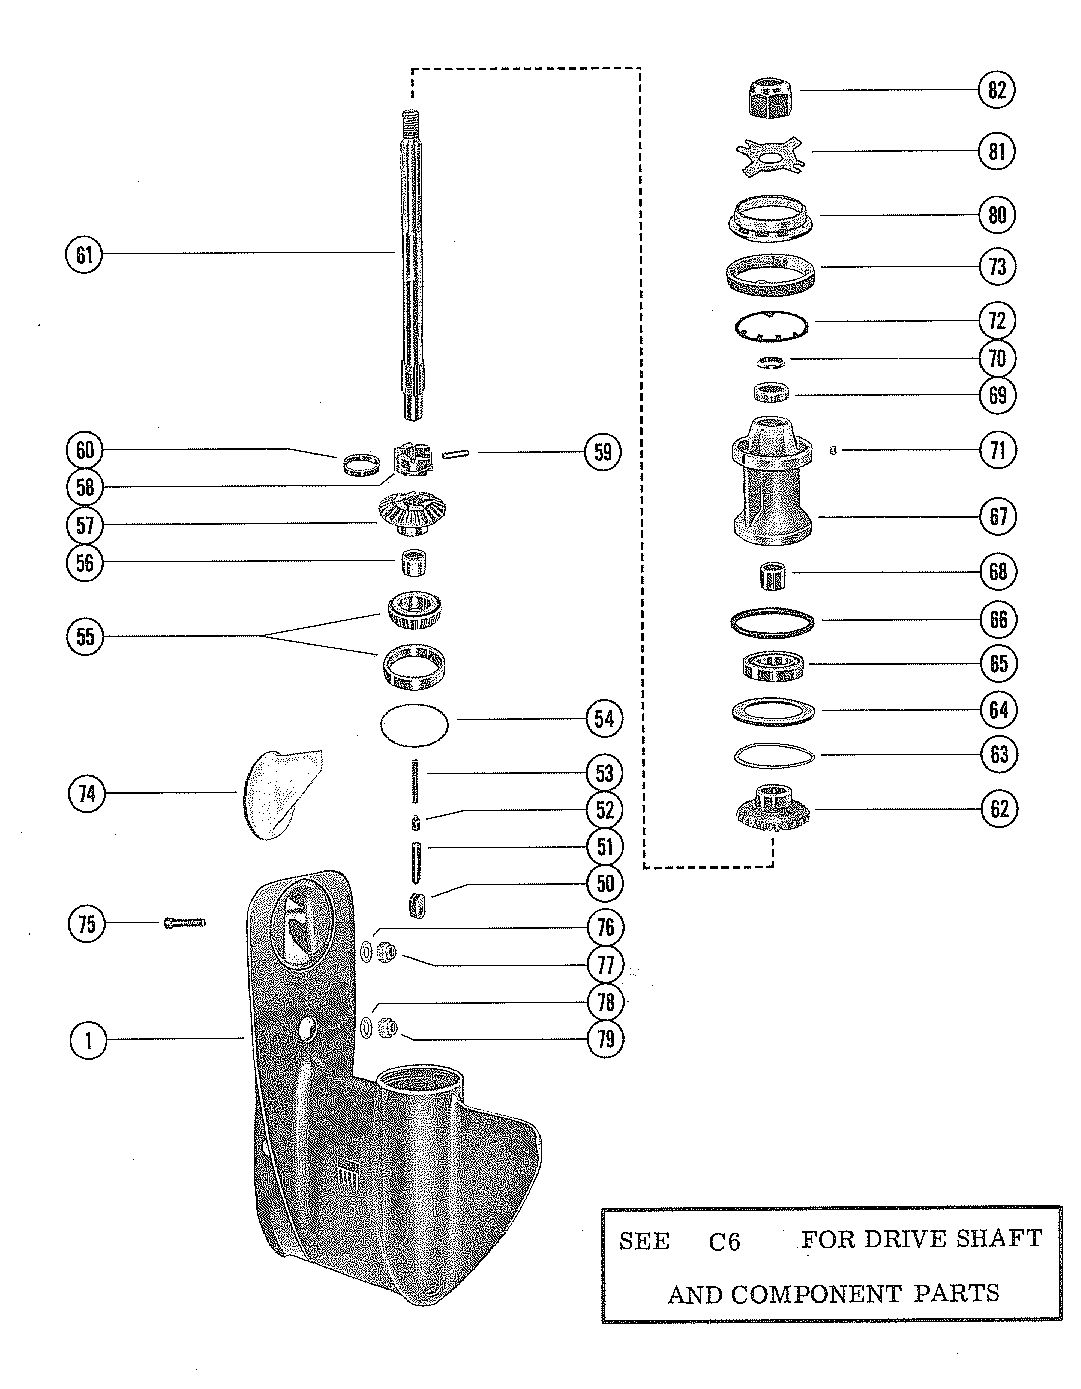 MARINER 70 HORSEPOWER GEAR HOUSING ASSEMBLY, COMPLETE (PAGE 2)